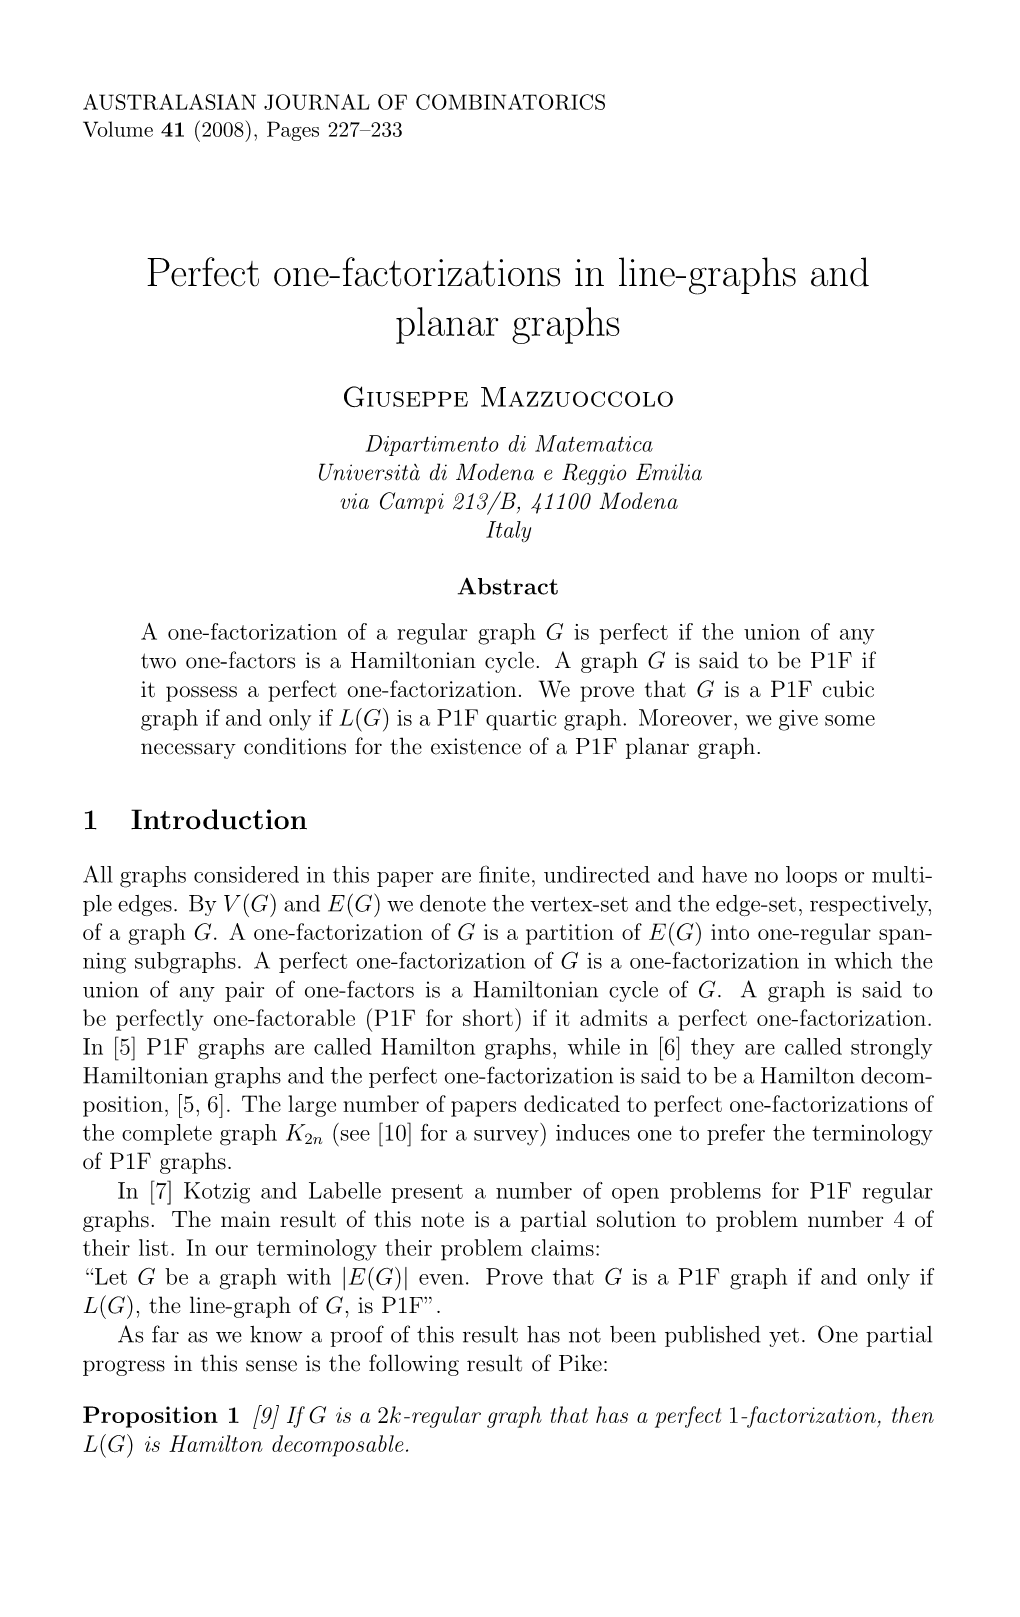 Perfect One-Factorizations in Line-Graphs and Planar Graphs